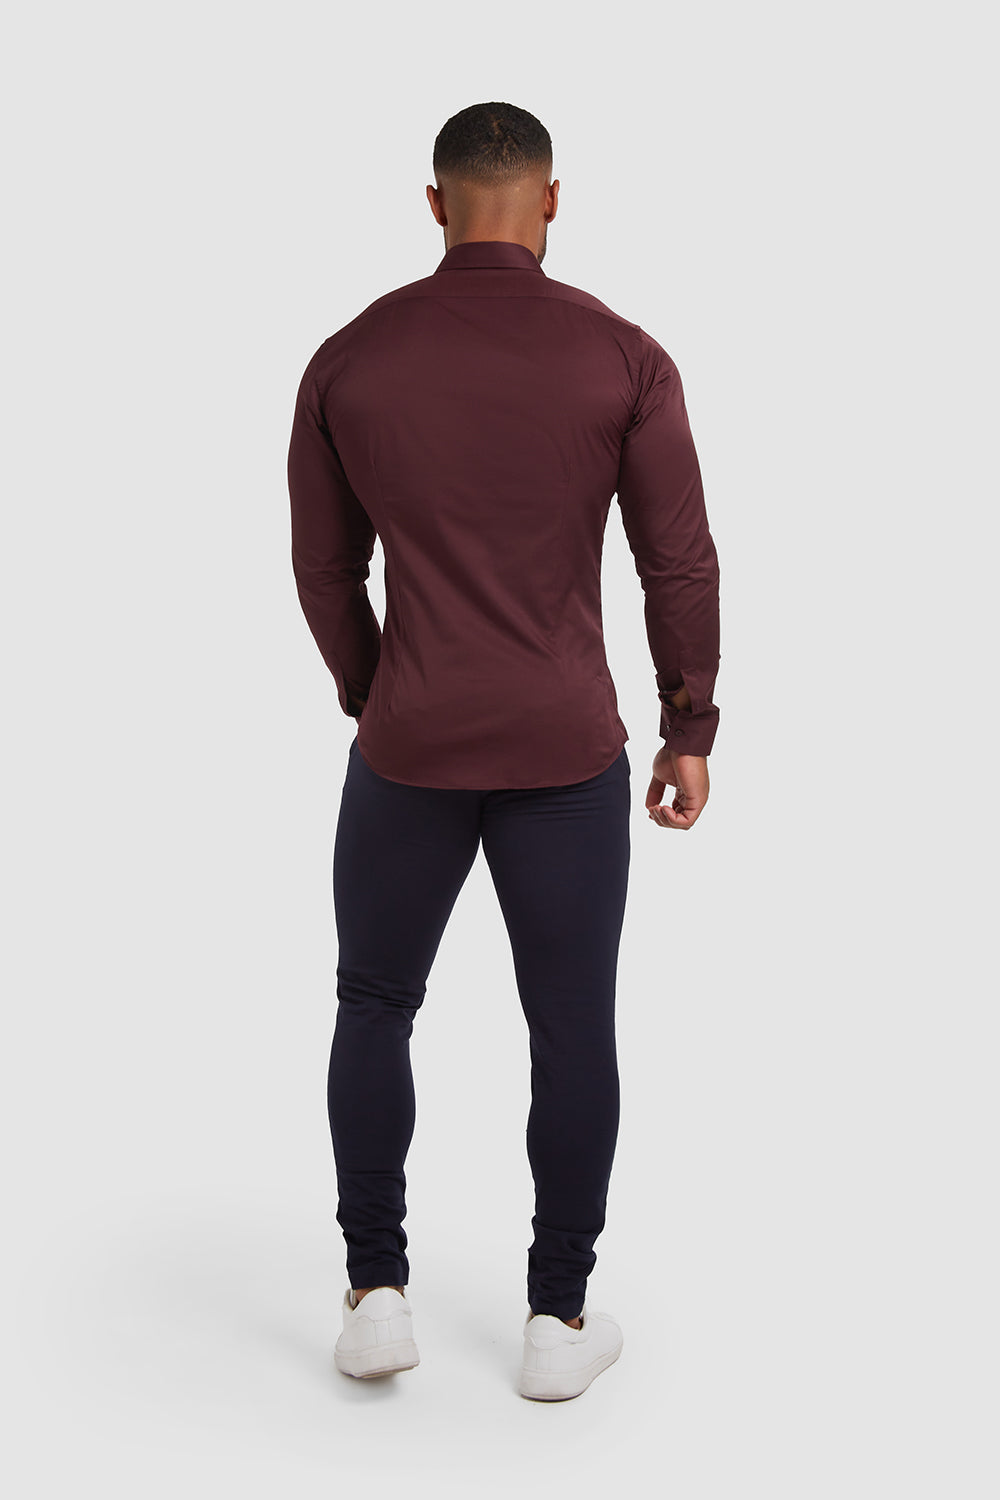 Muscle Fit Signature Shirt - Burgundy in - ATHLETE USA TAILORED 2.0